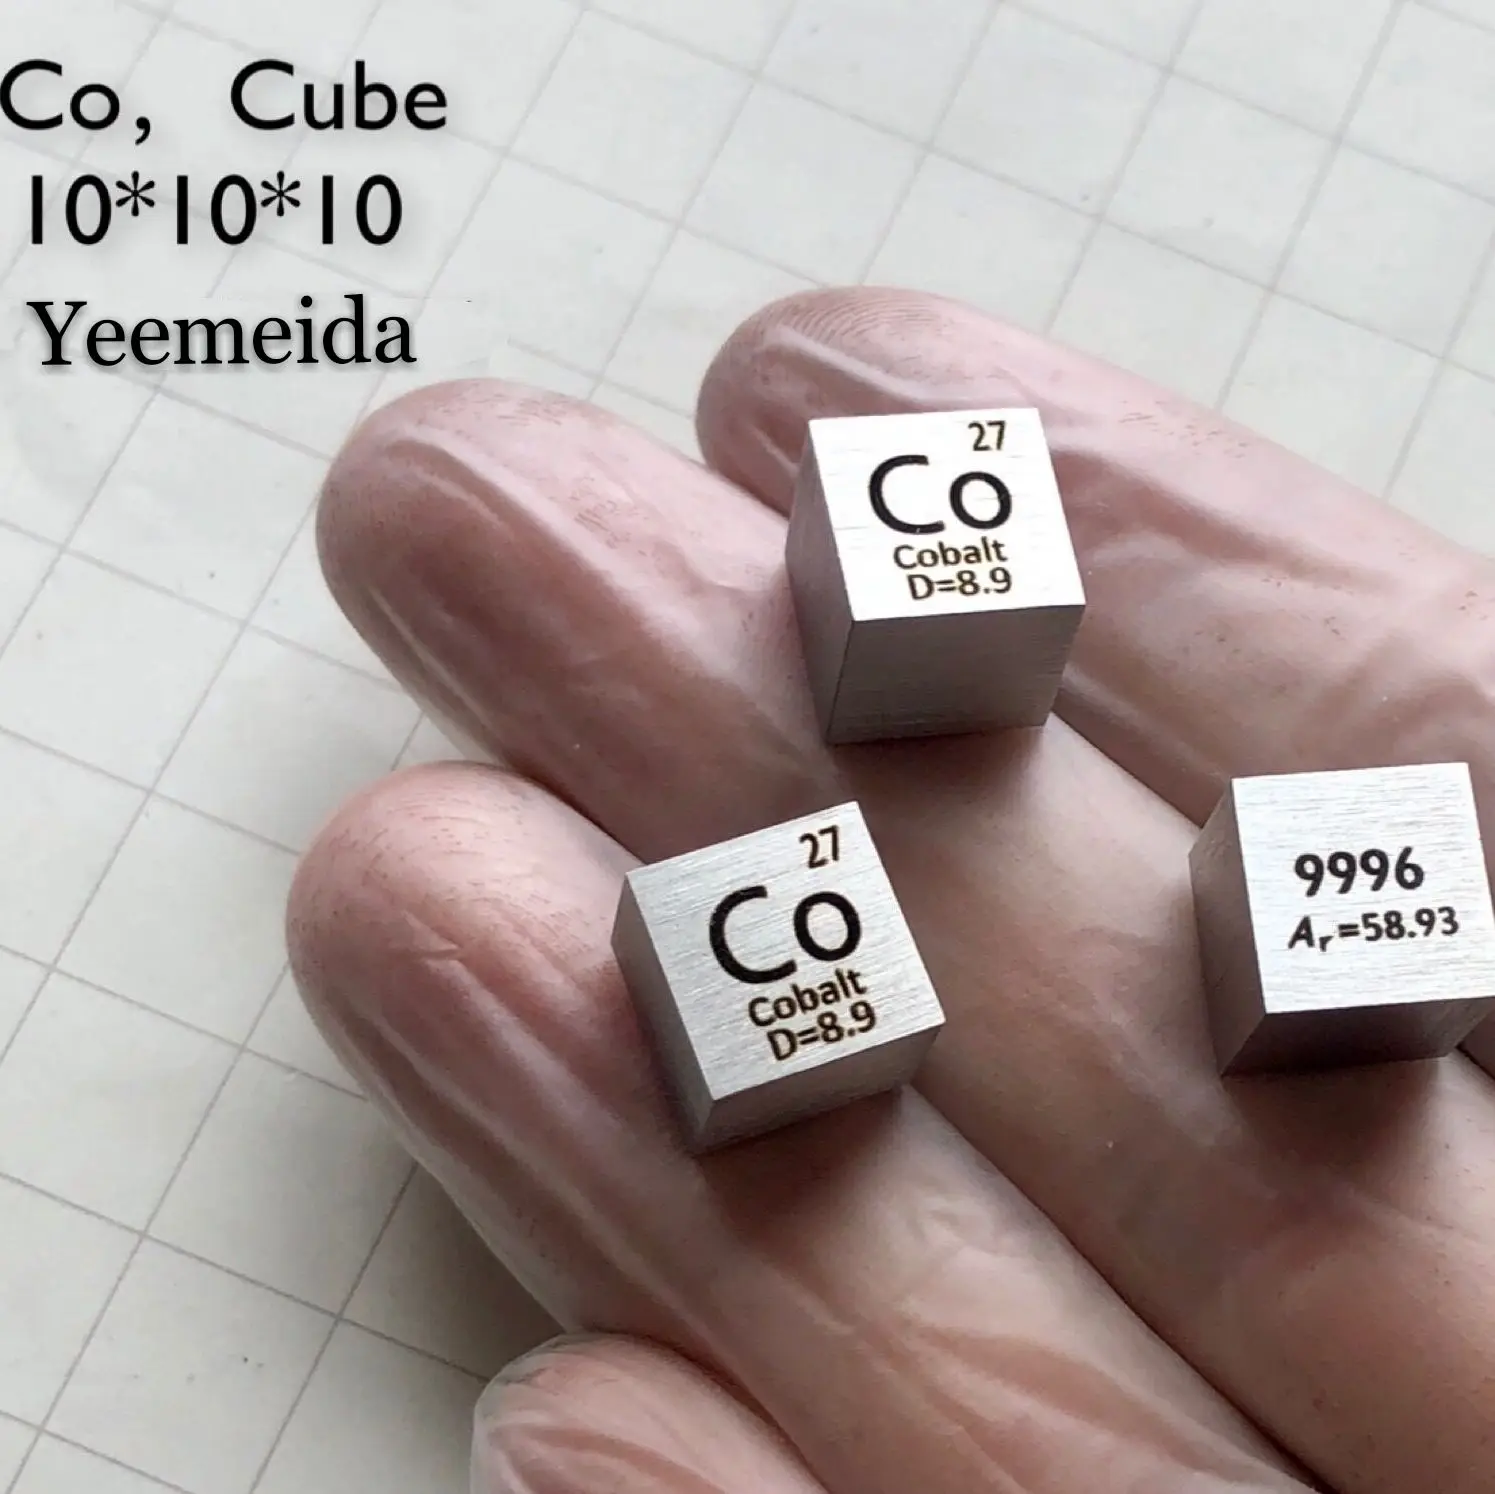 

High Purity 99.96 Pure Cobalt Co Carved Element Periodic Table 10mm Cube